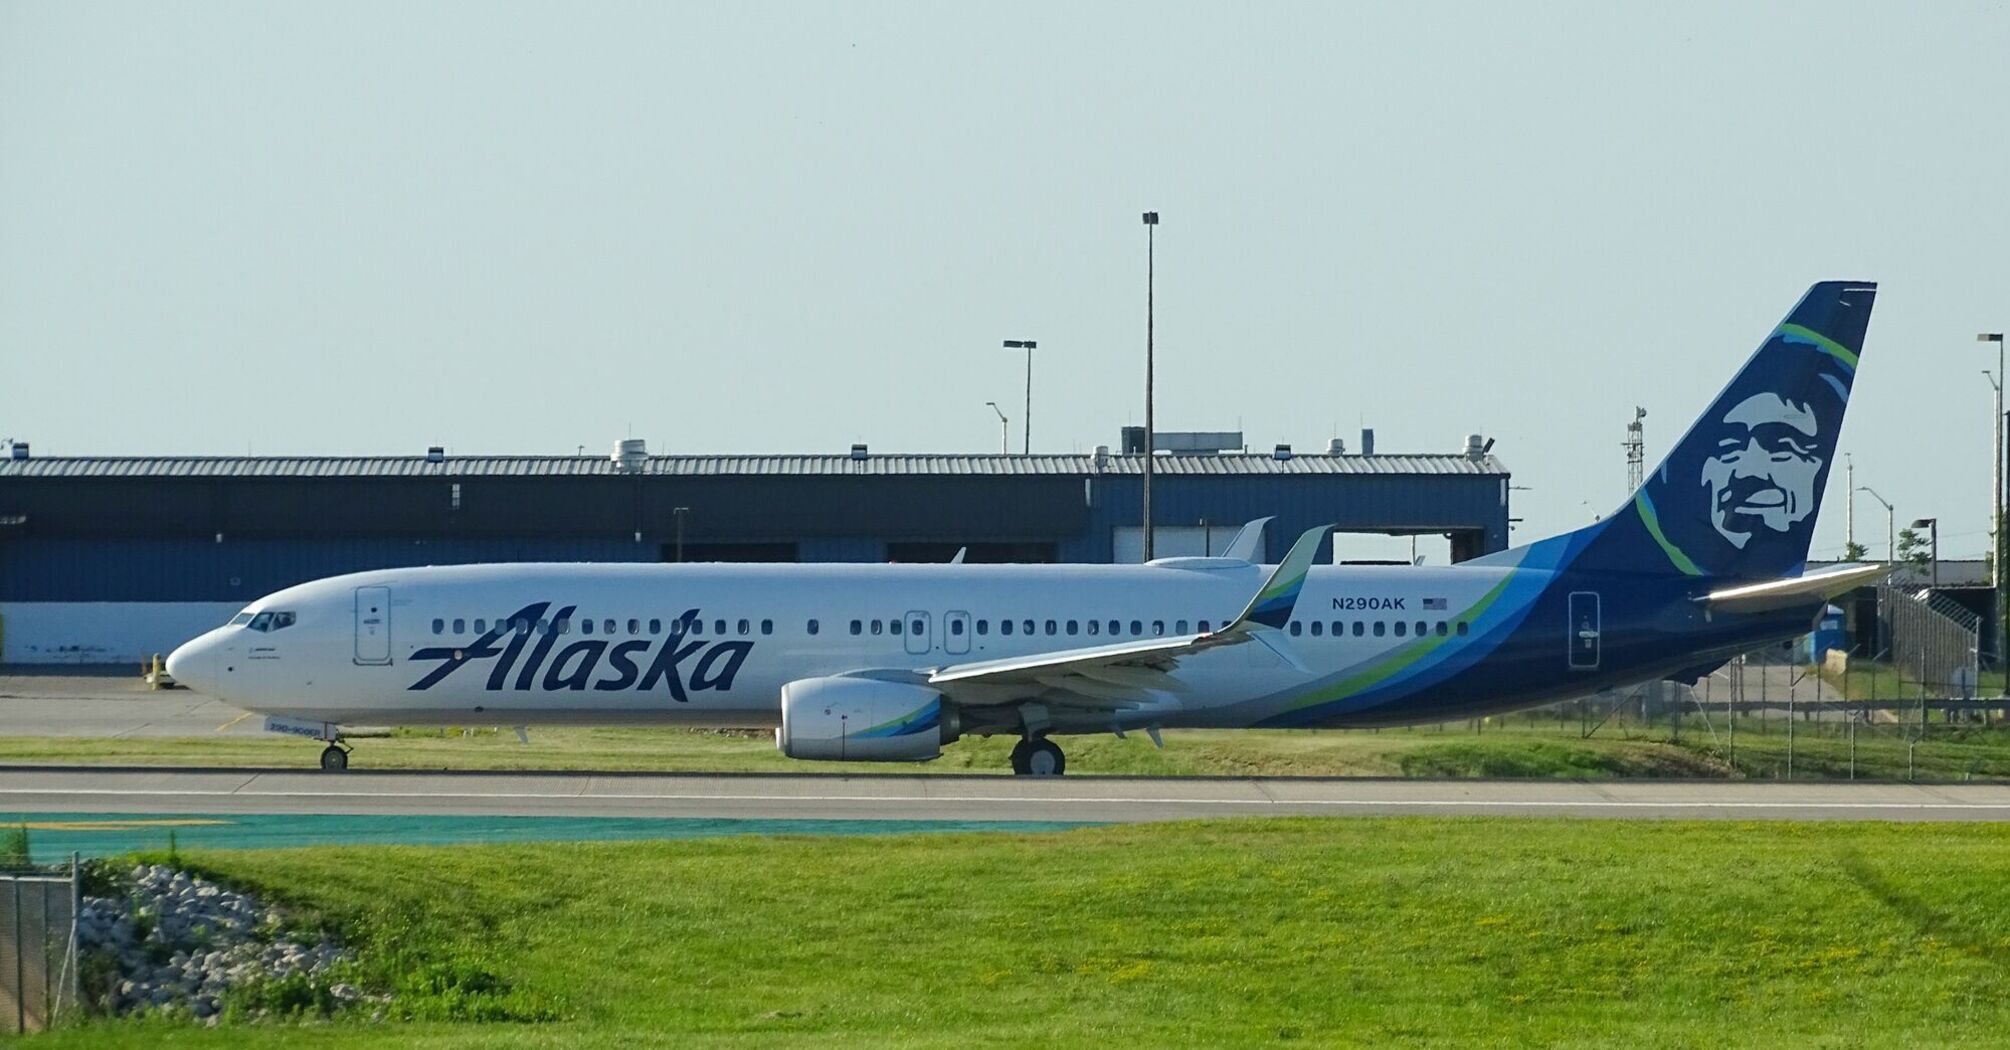 An Alaska Airlines on the runway with the airline's distinctive blue